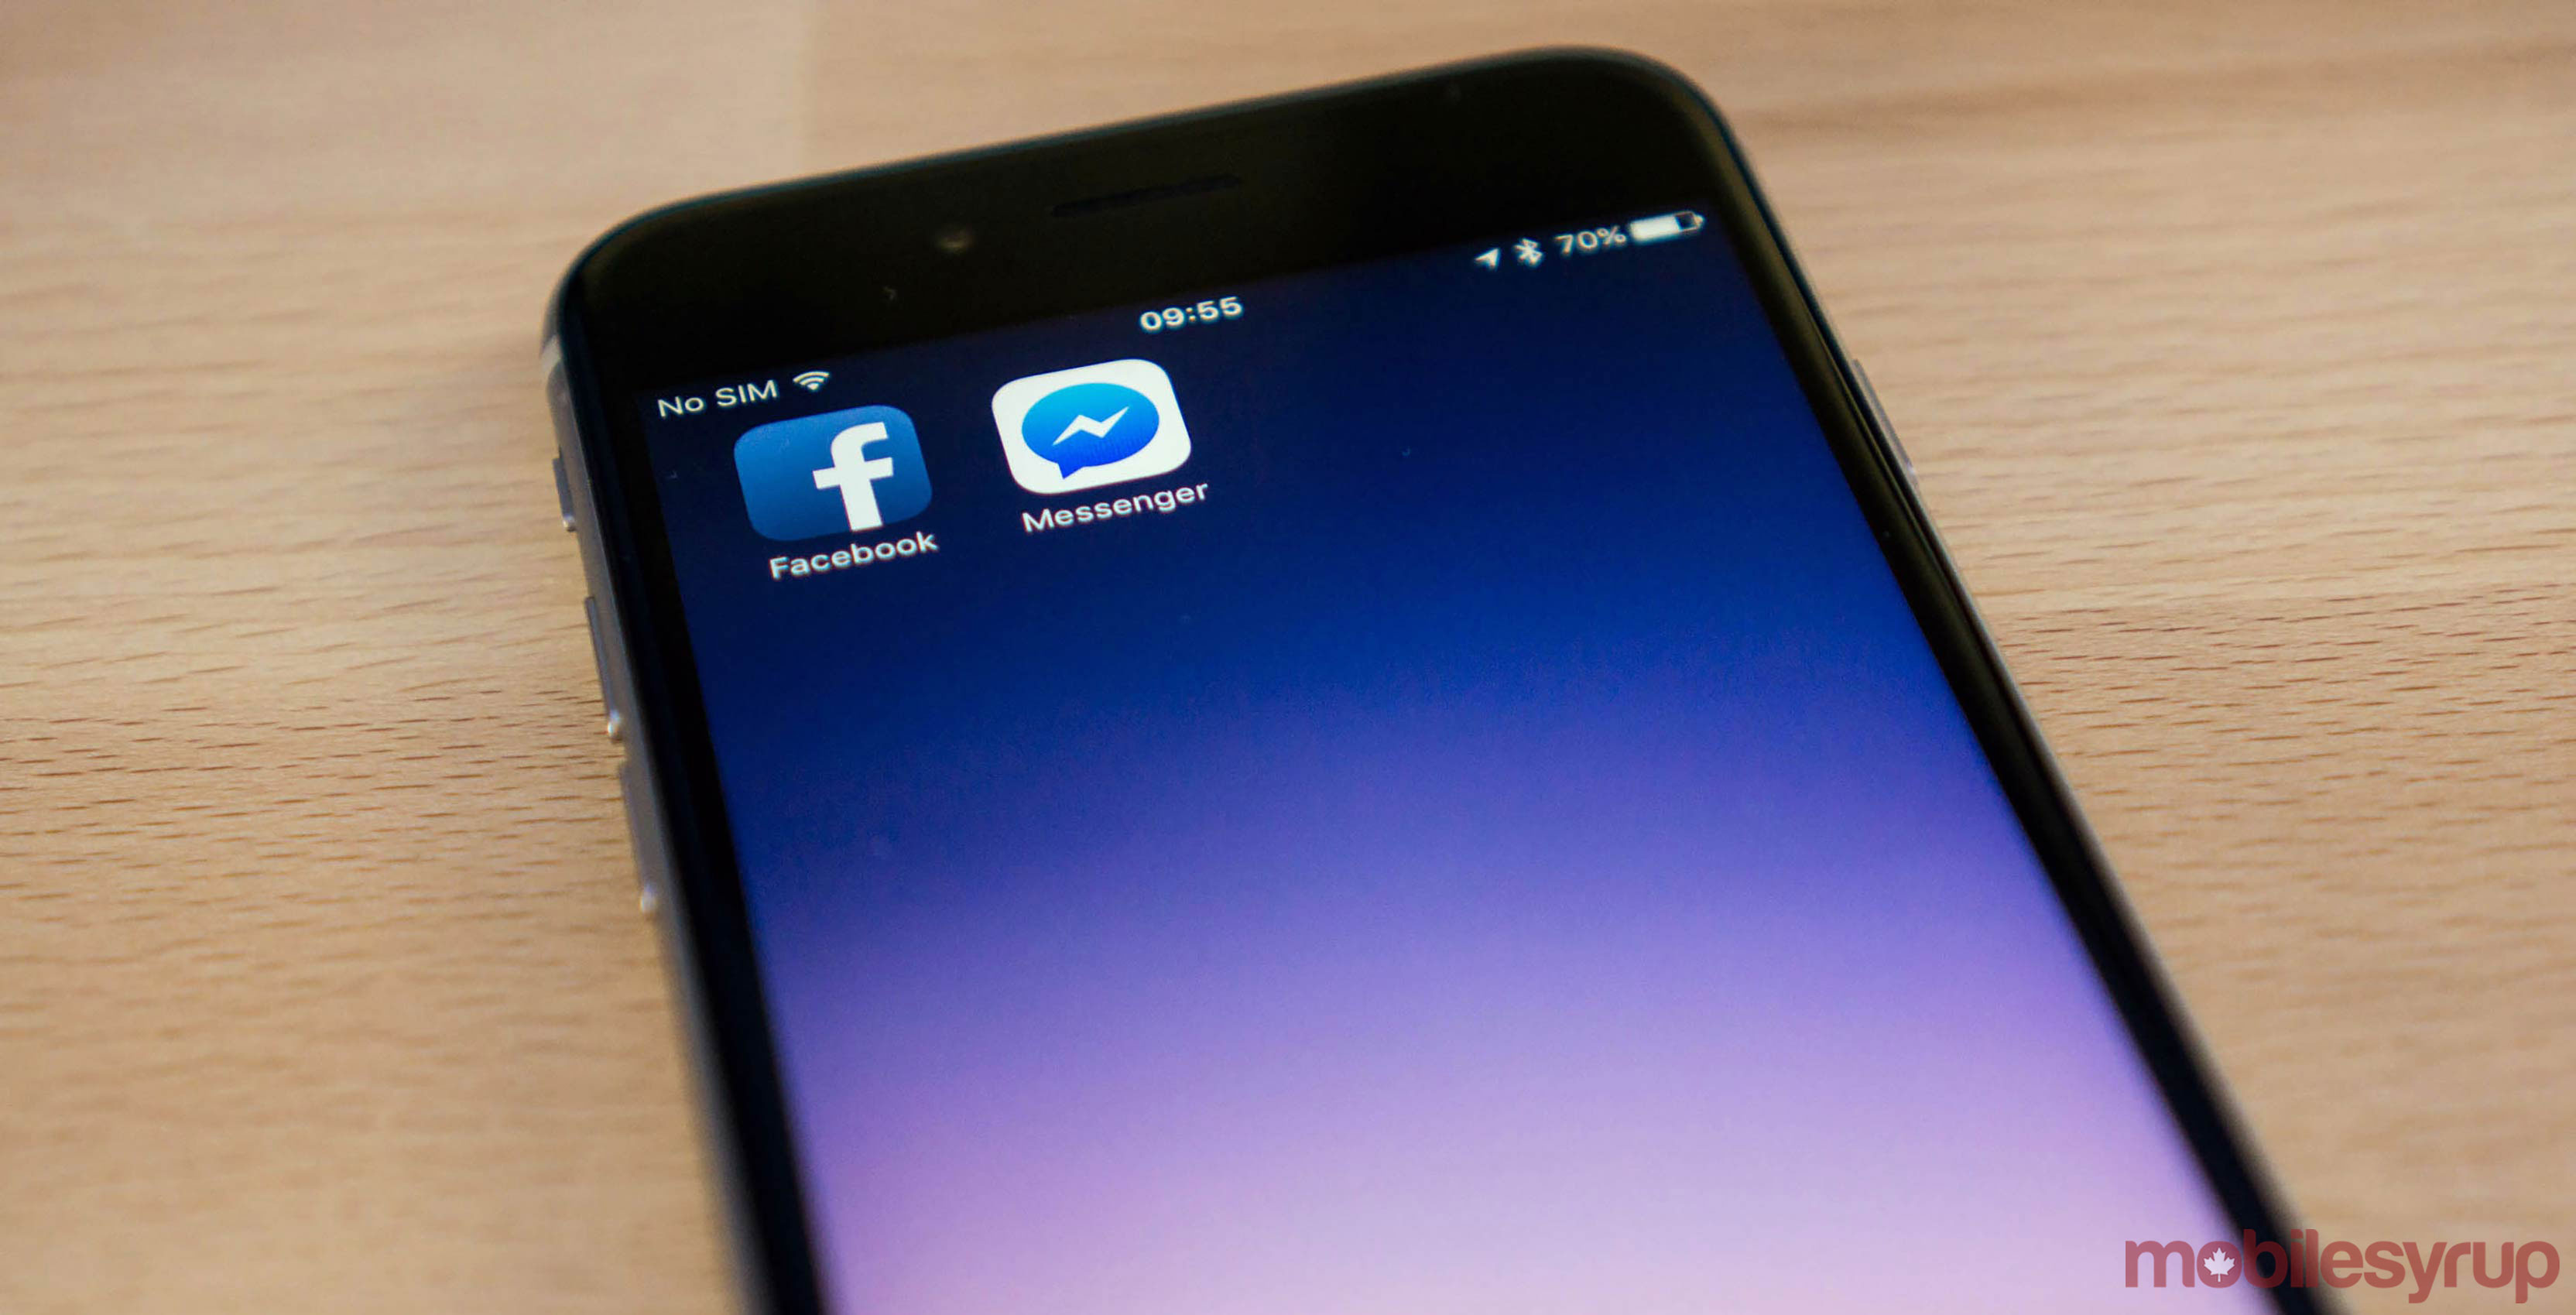 Facebook and Messenger on iPhone